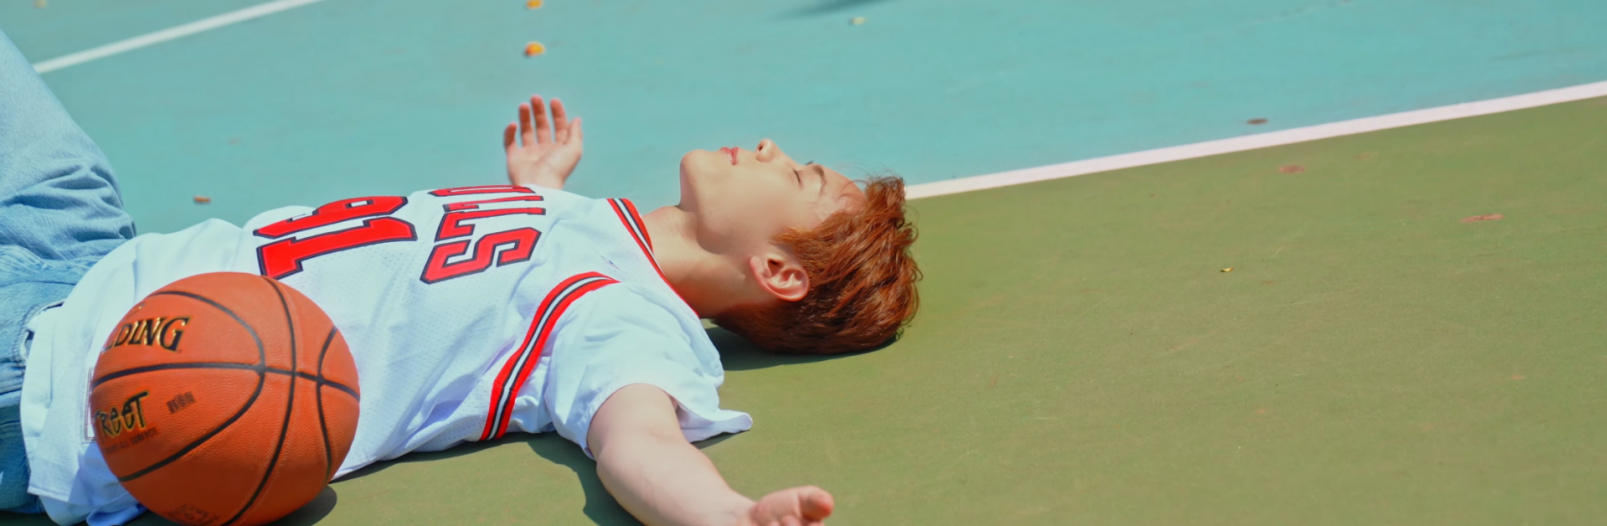 Yeong Seobin is laying down flat on his back on a basketball court. He is wearing a Chicago Bulls Jersey, and a basketball is laying next to him